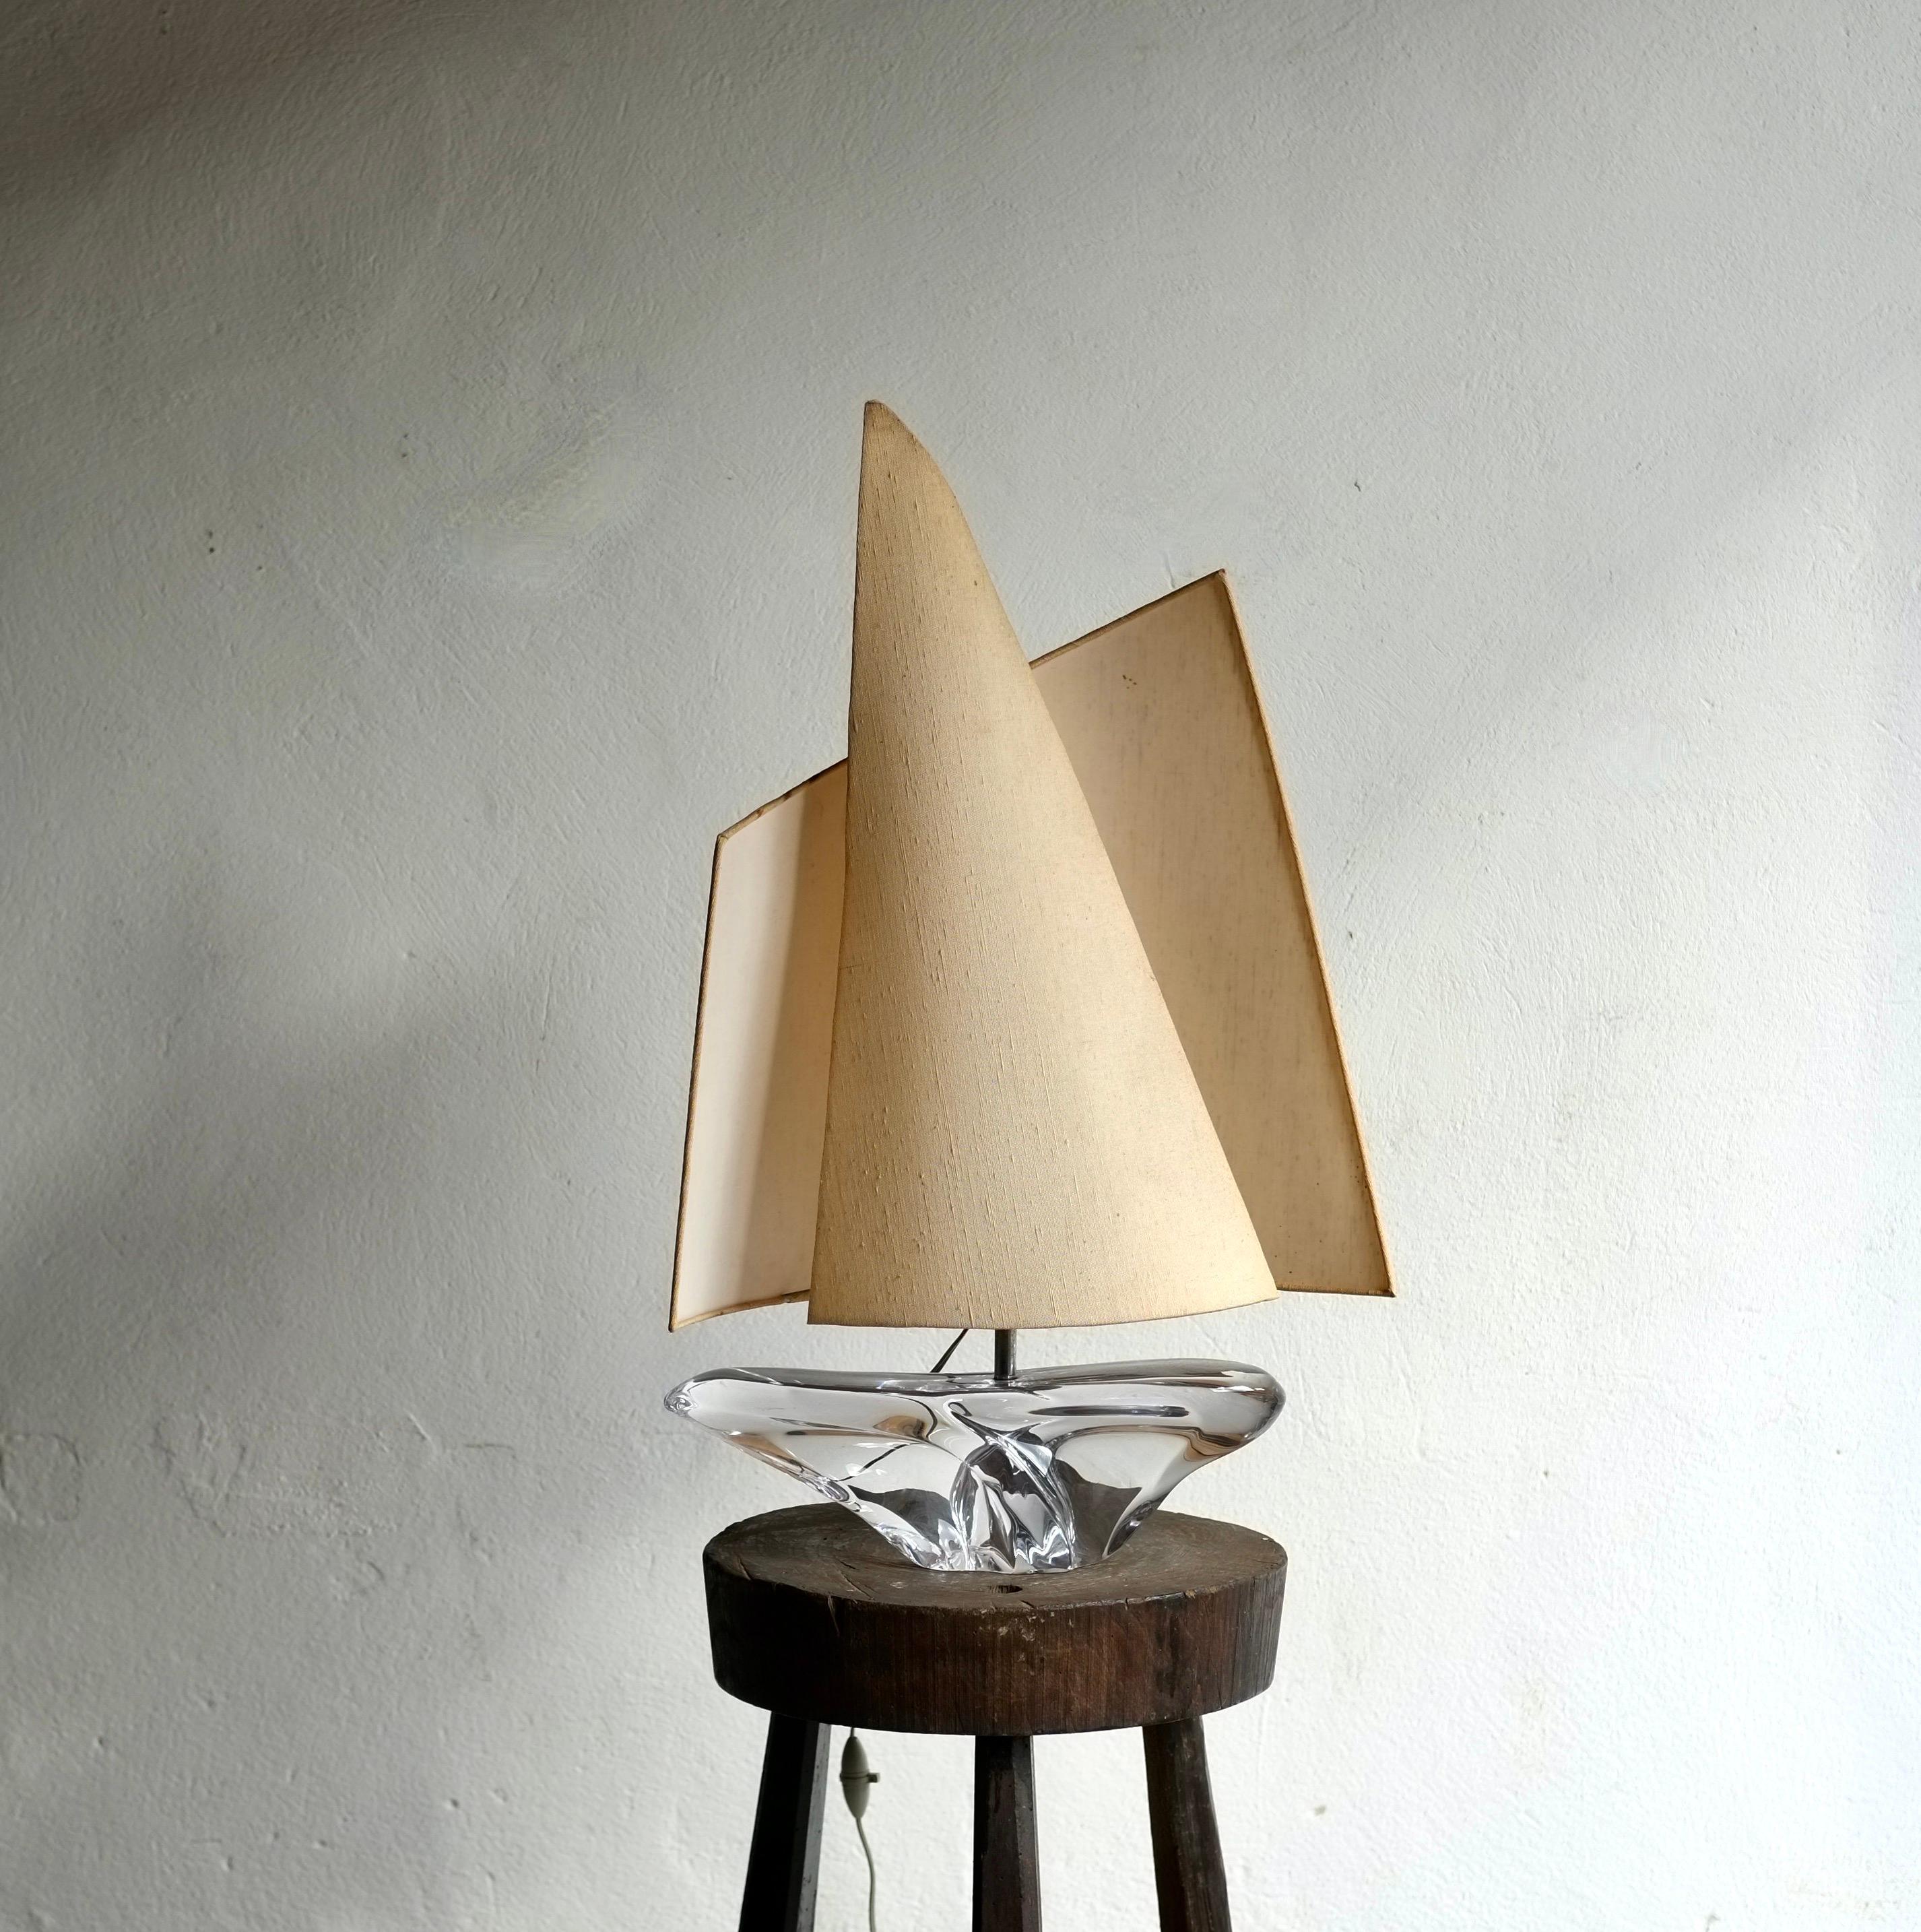 A large sailboat lamp manufactured by Daum, France in the 1960's.

Crystal glass base with a striking sculptural windsail style shade. In very good vintage condition with no damage.